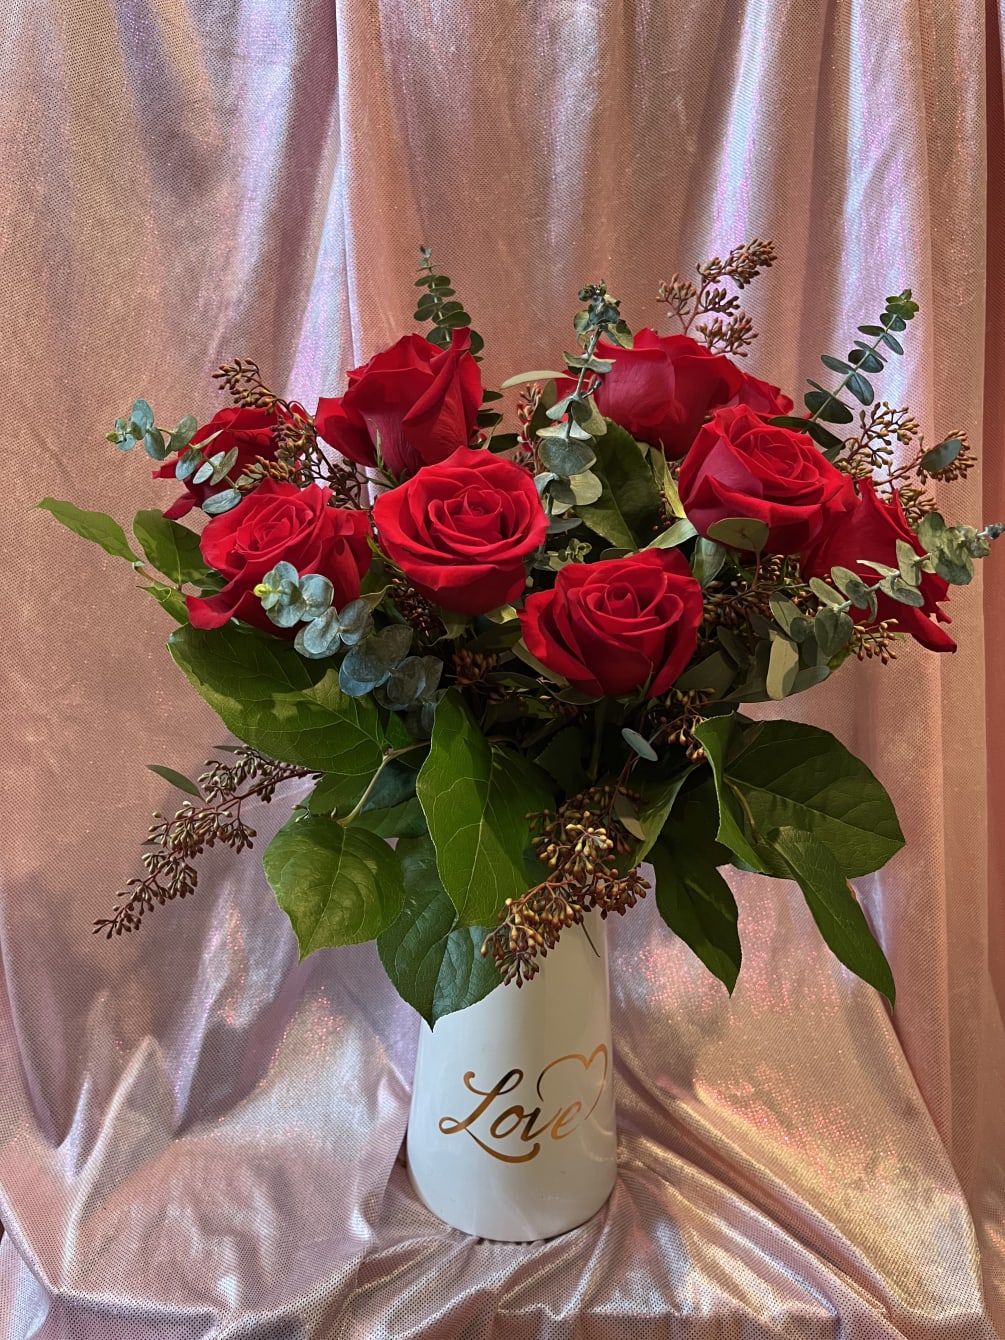 A gorgeous presentation of 1 dozen red roses accented with eucalyptus and